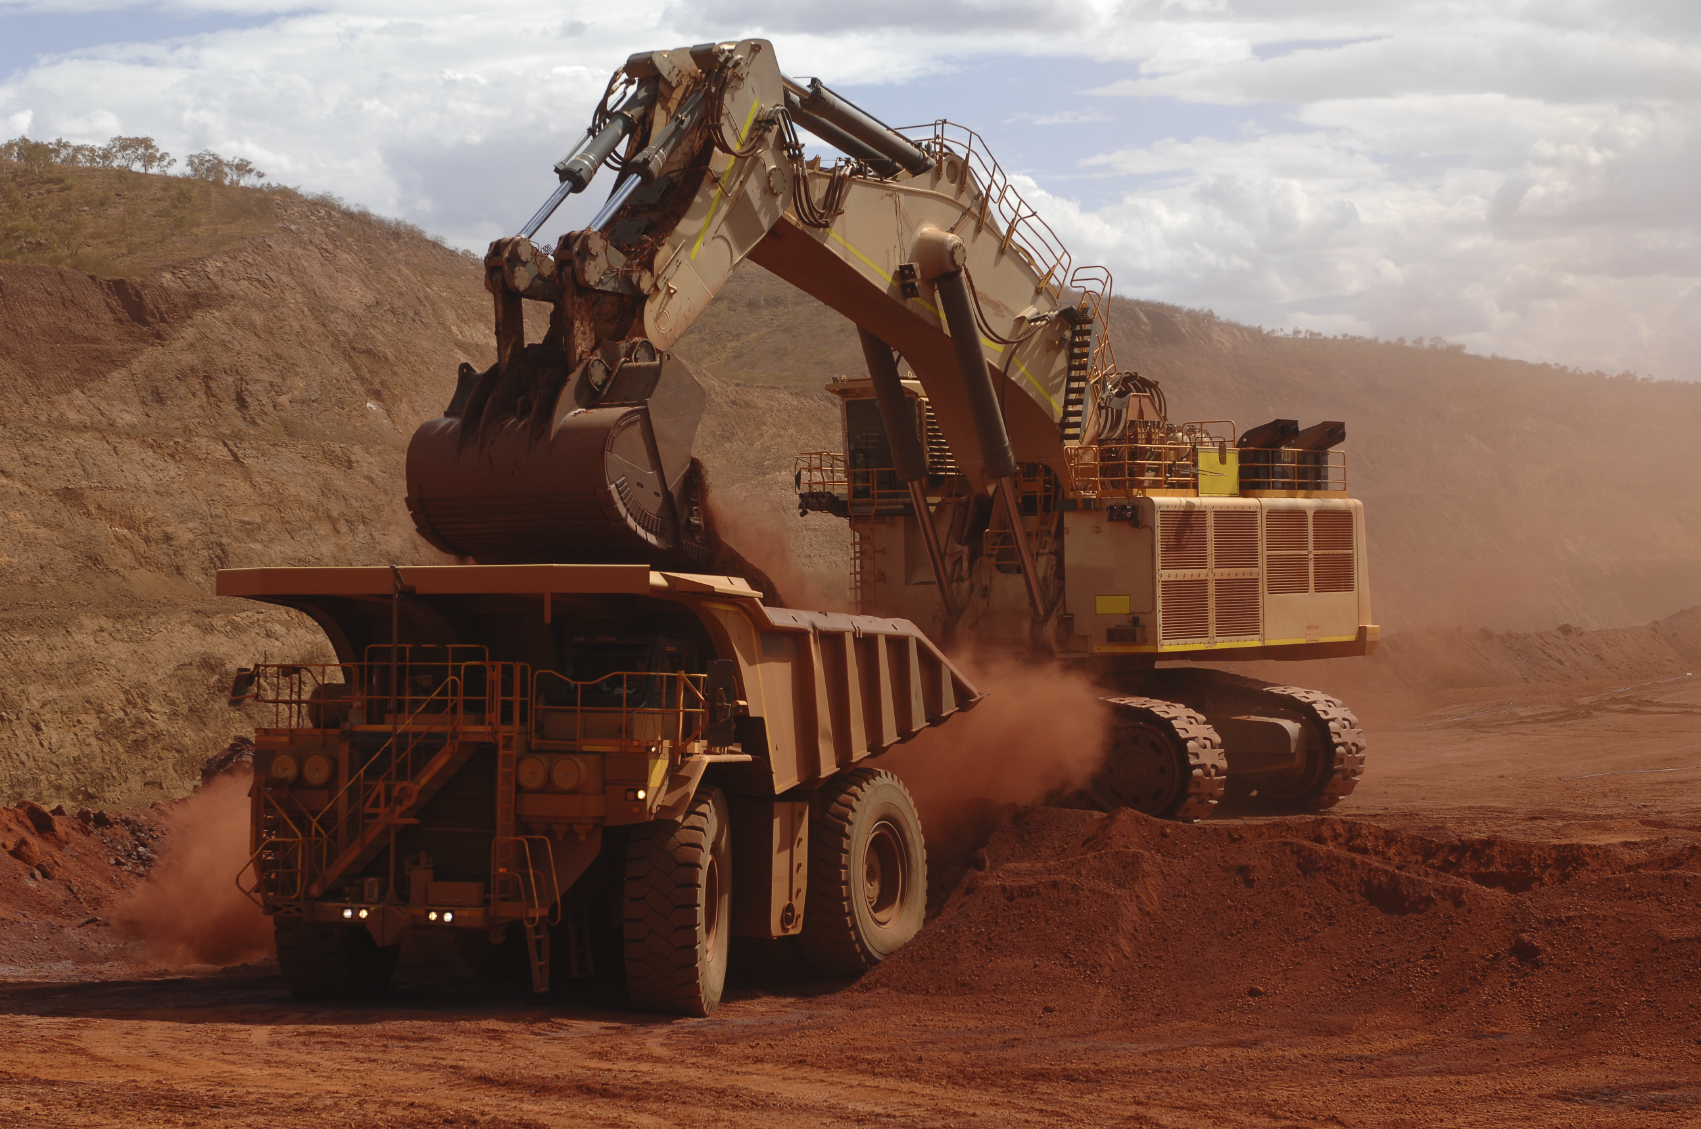 New to Mining? Here are the Most Common Types of Mining Equipment